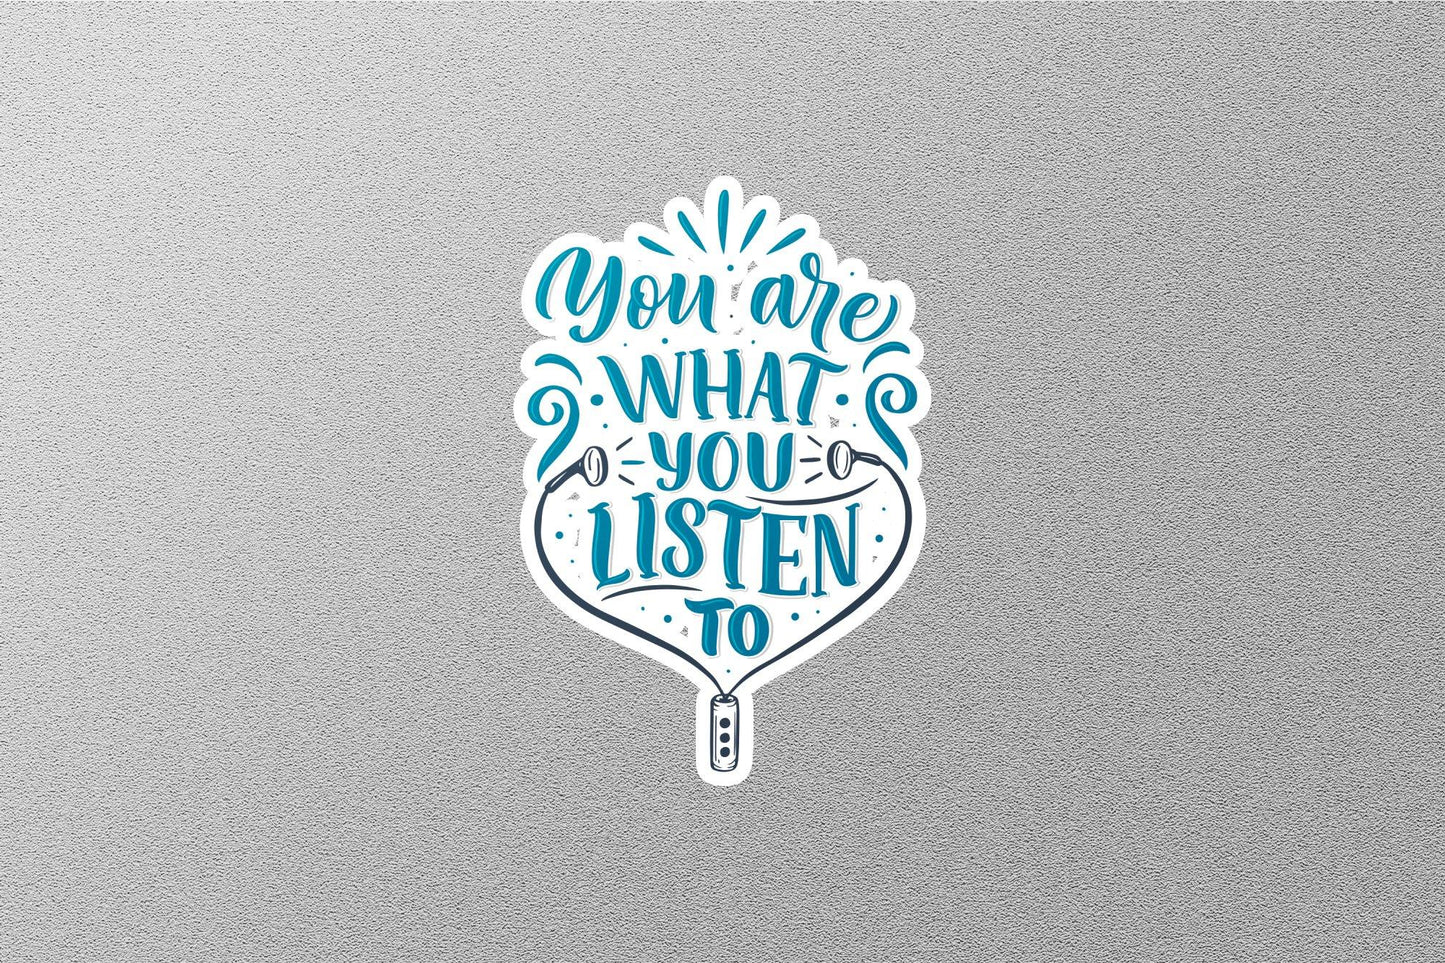 You are What YOU LISTEN TO Sticker